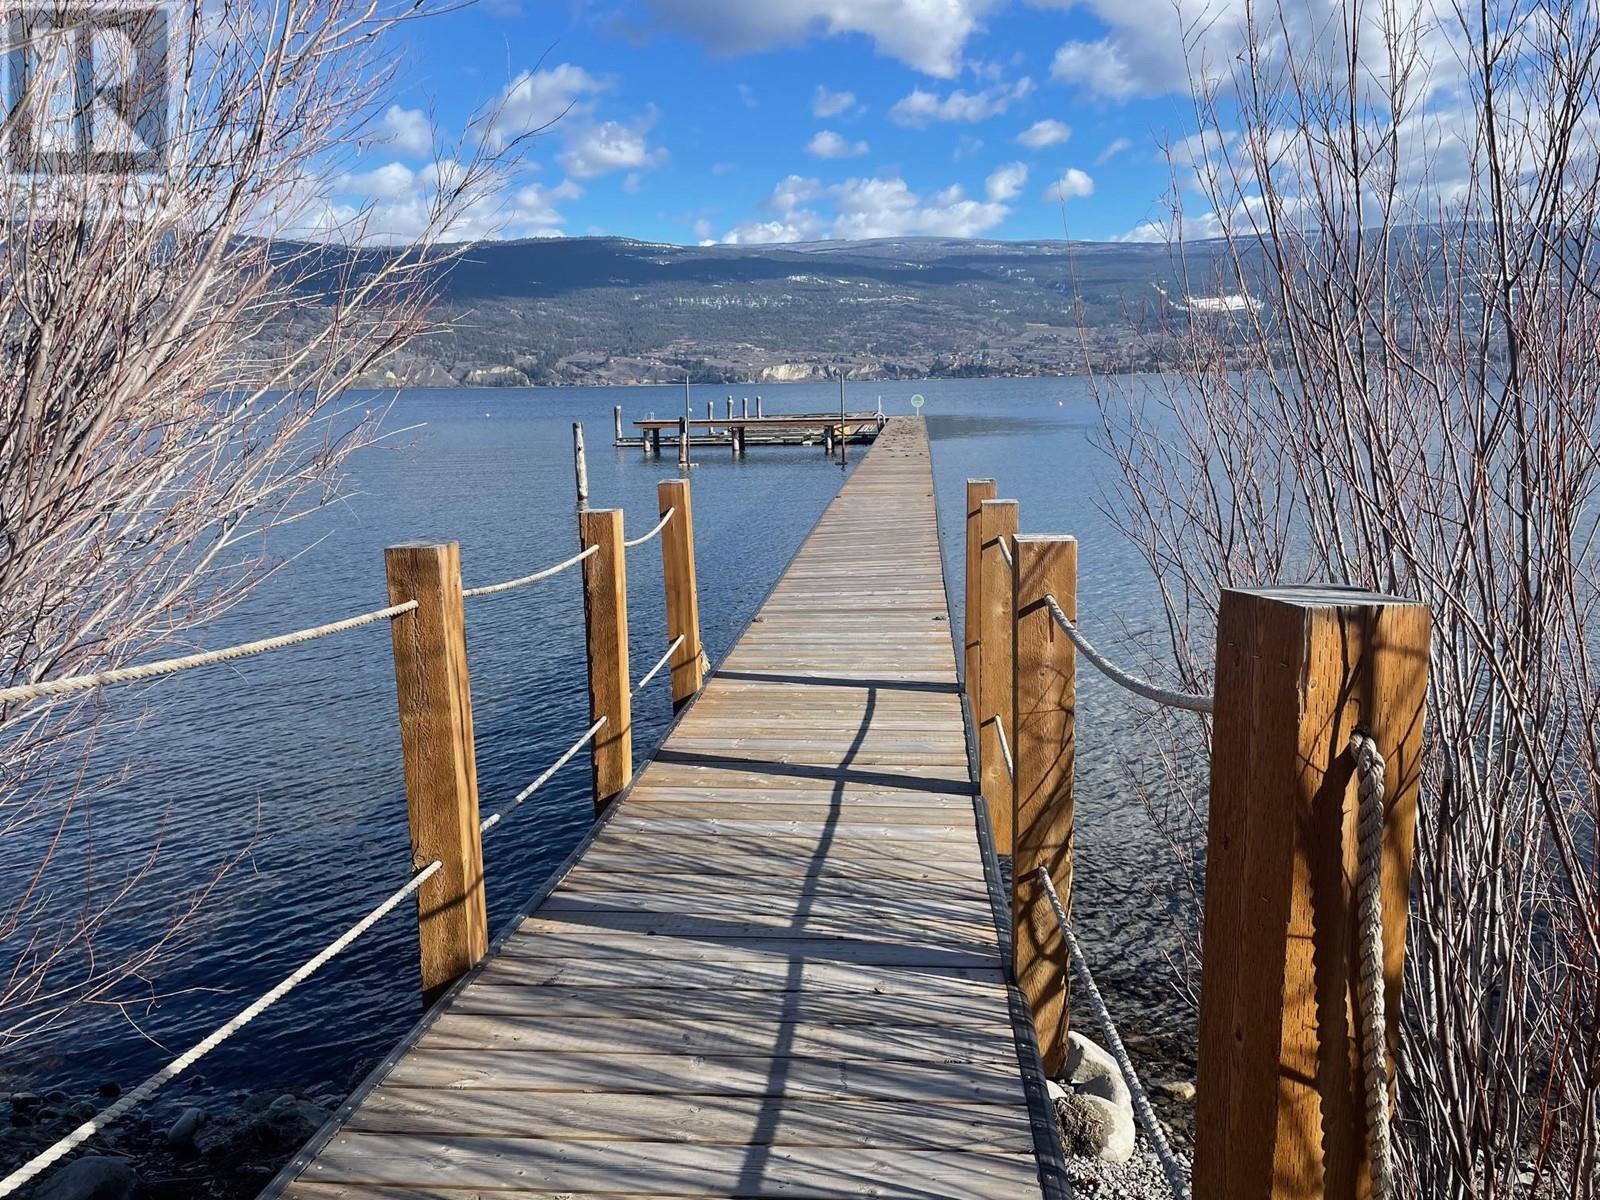 120 13011 Lakeshore Drive South, Summerland